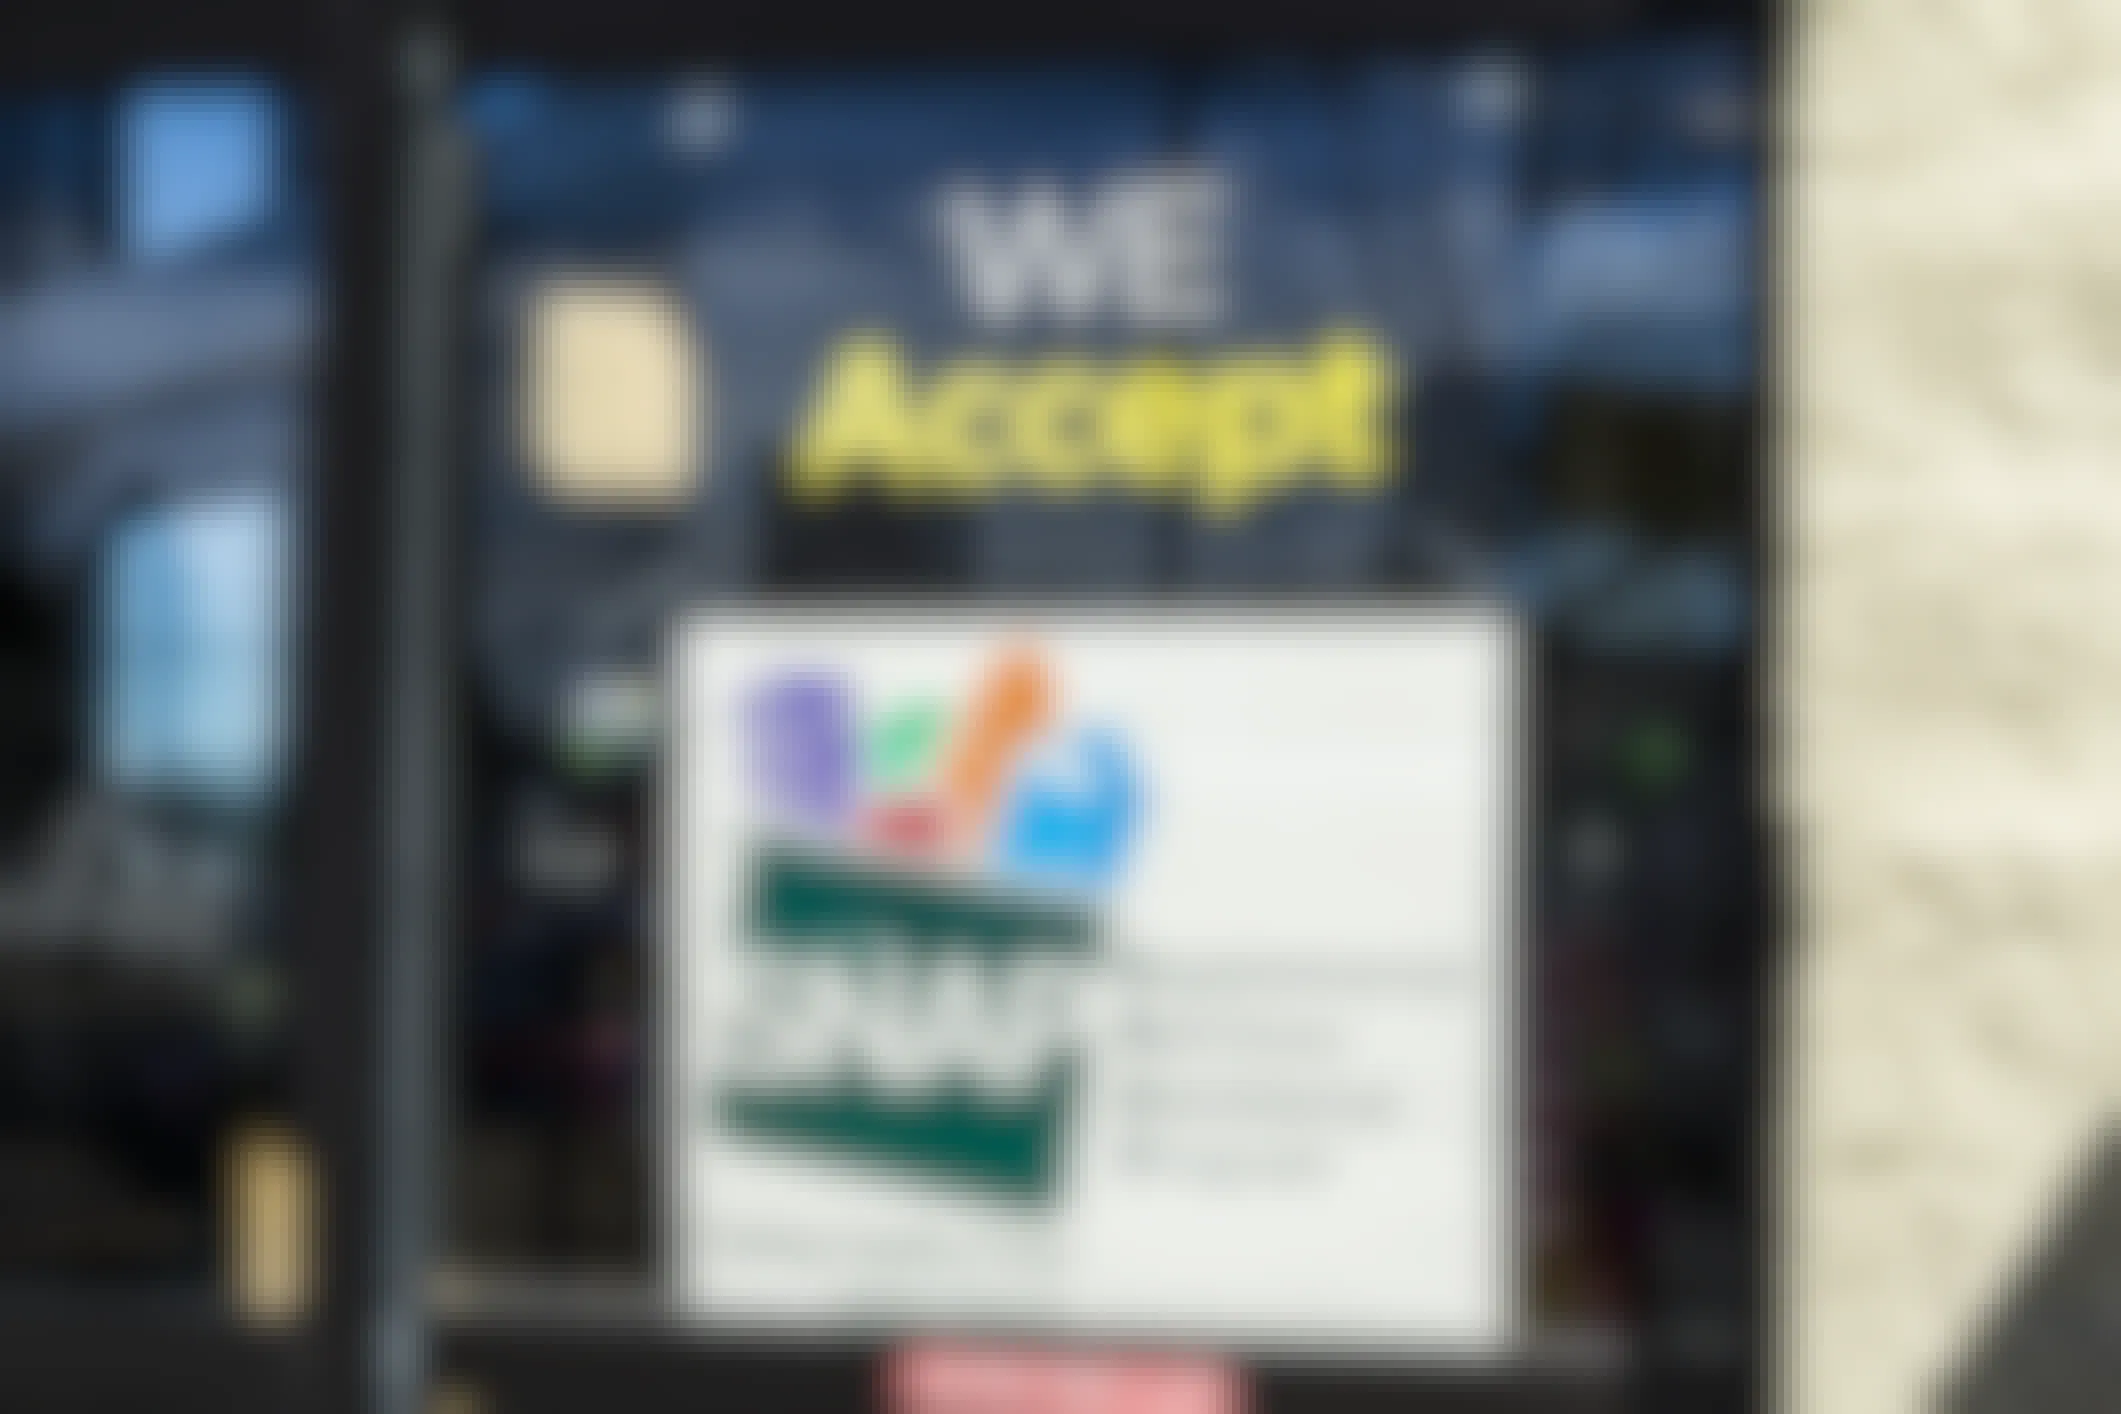 Store sign accepting SNAP payments